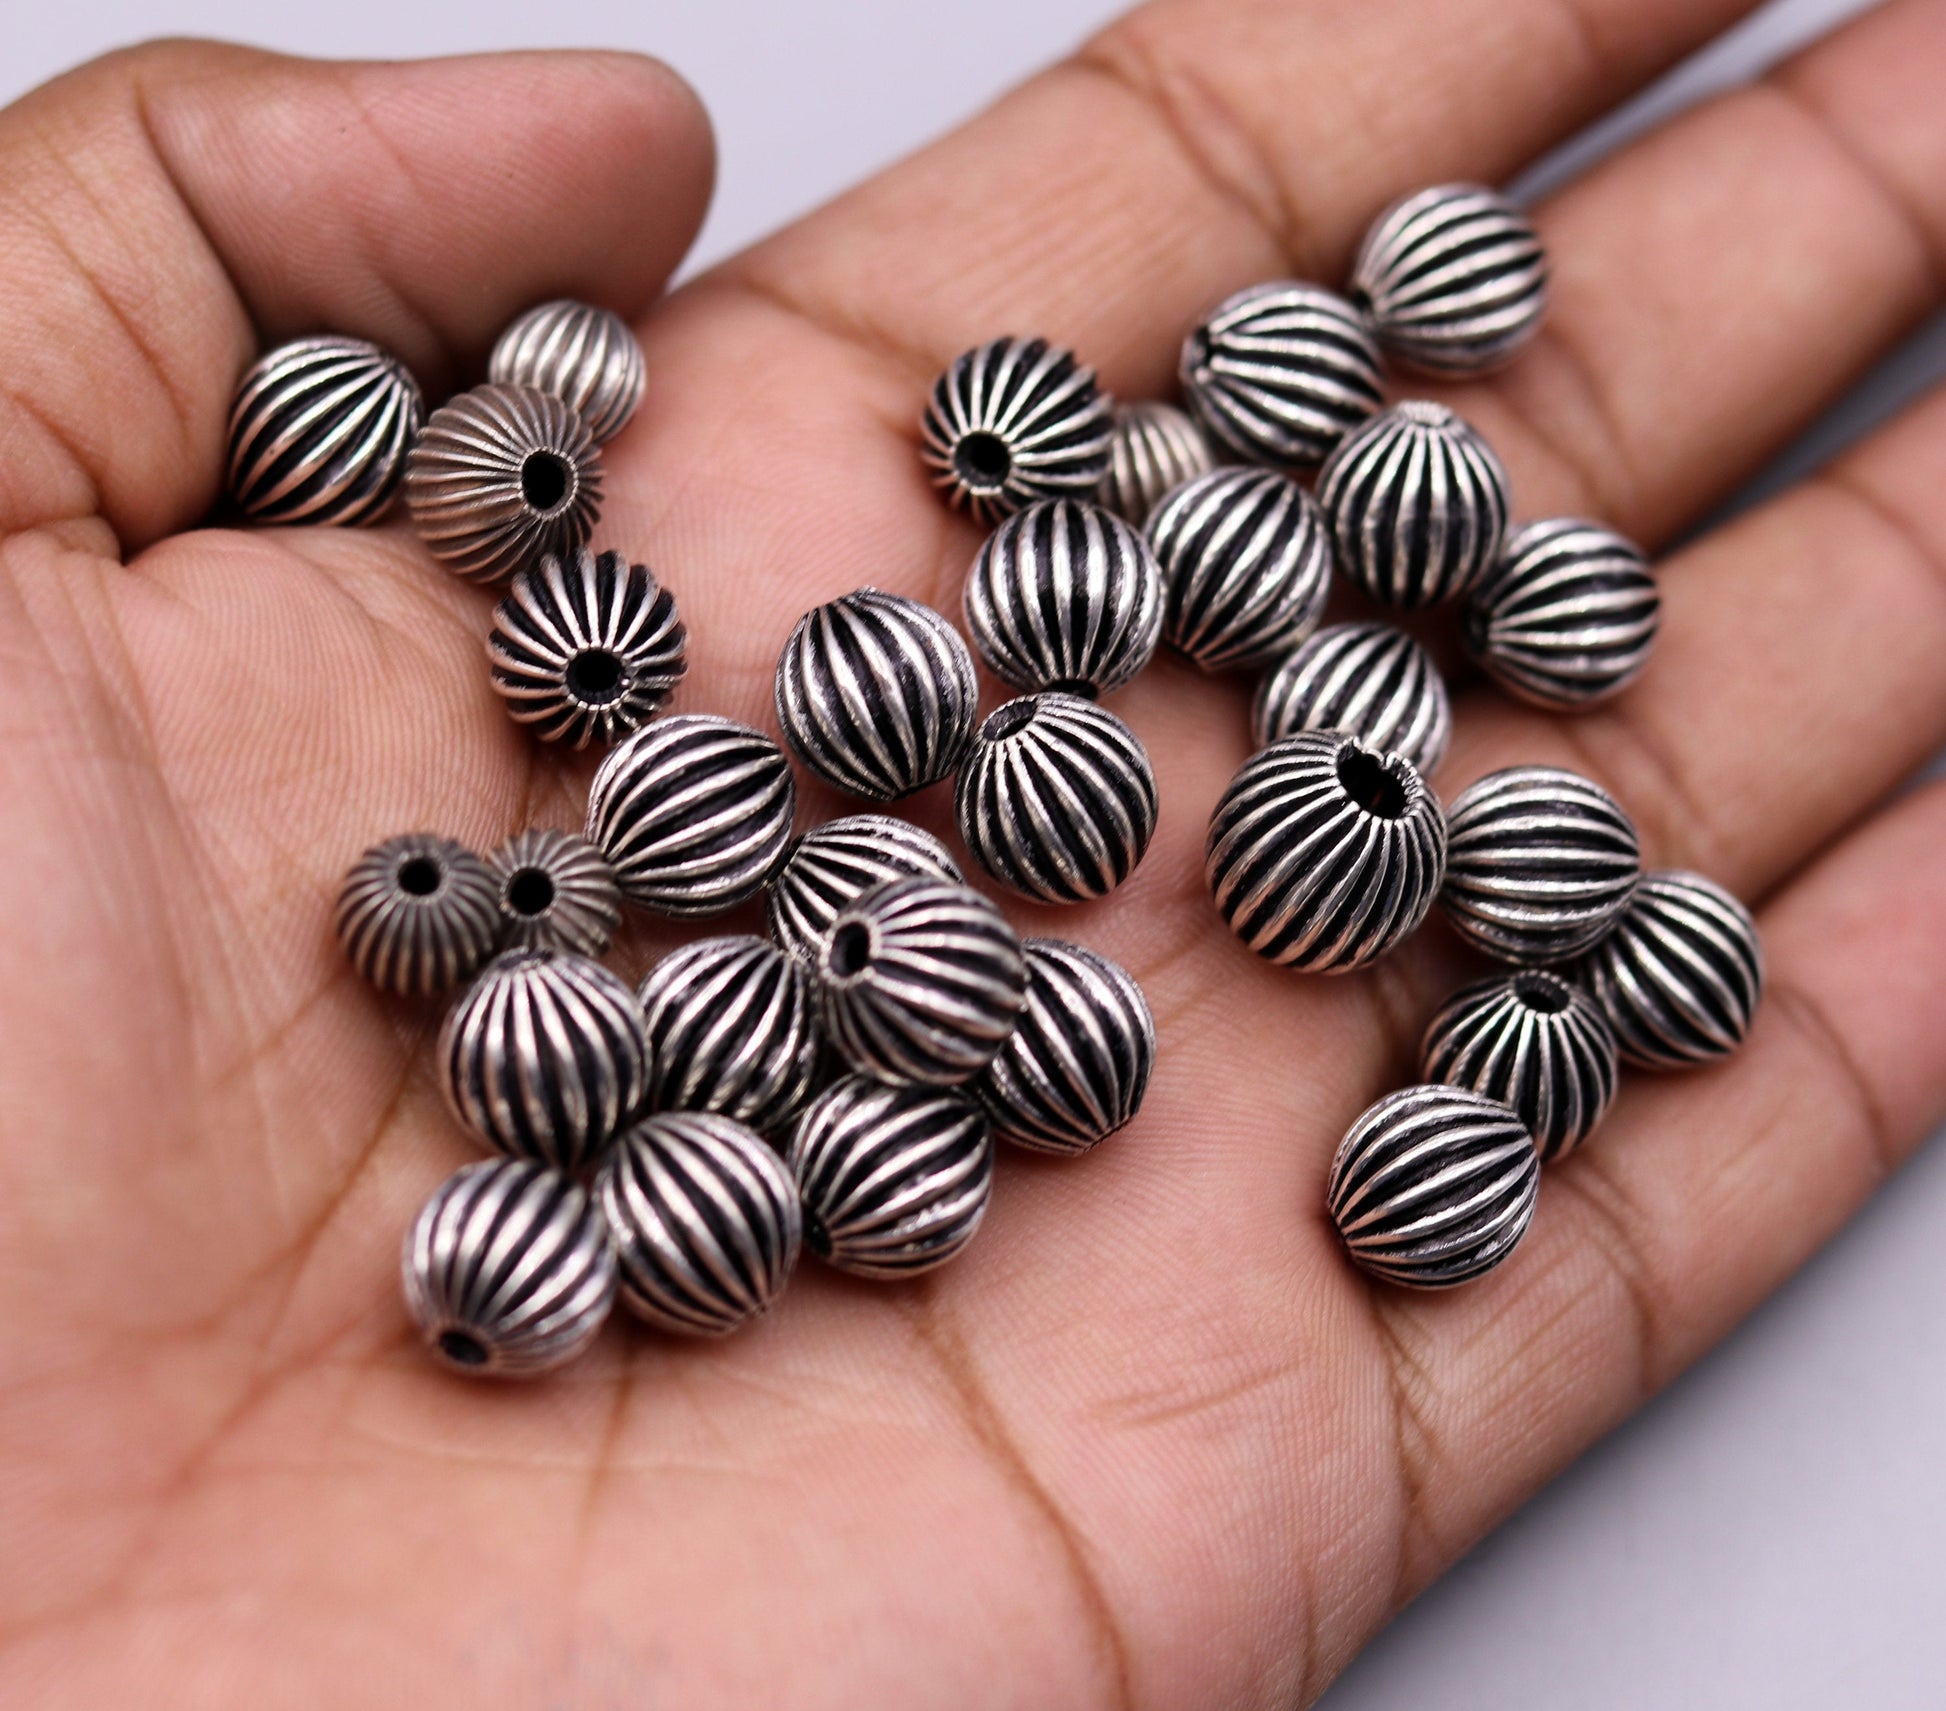 Lot 10 pieces Vintage antique design handmade 925 sterling silver beads  loose beads for jewelry making ideas bd04